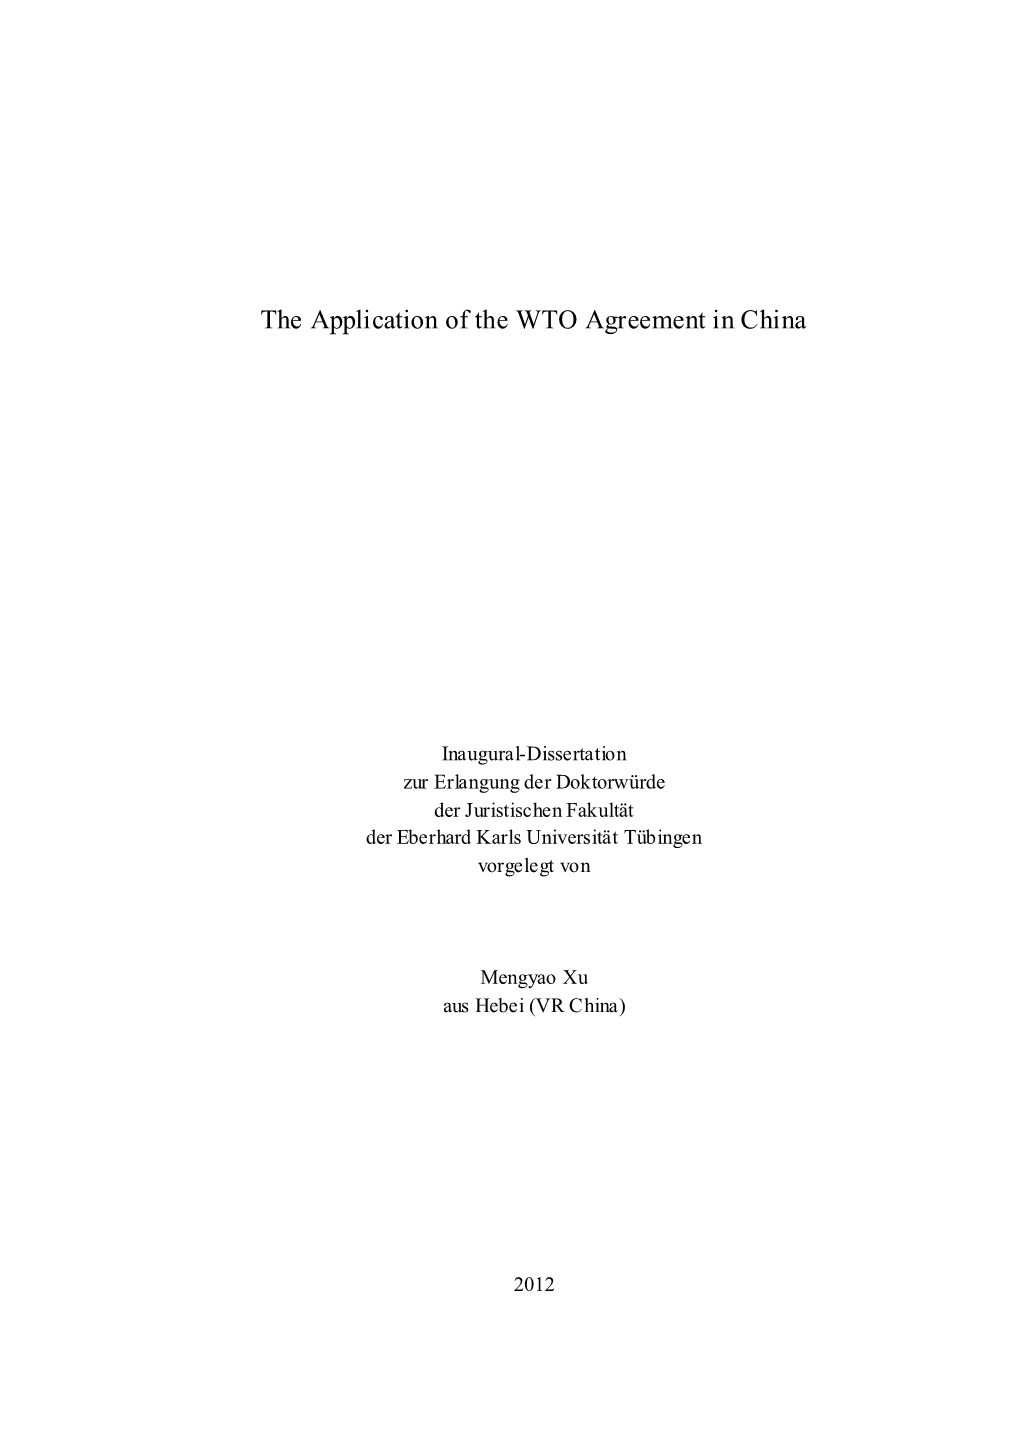 The Application of the WTO Agreement in China